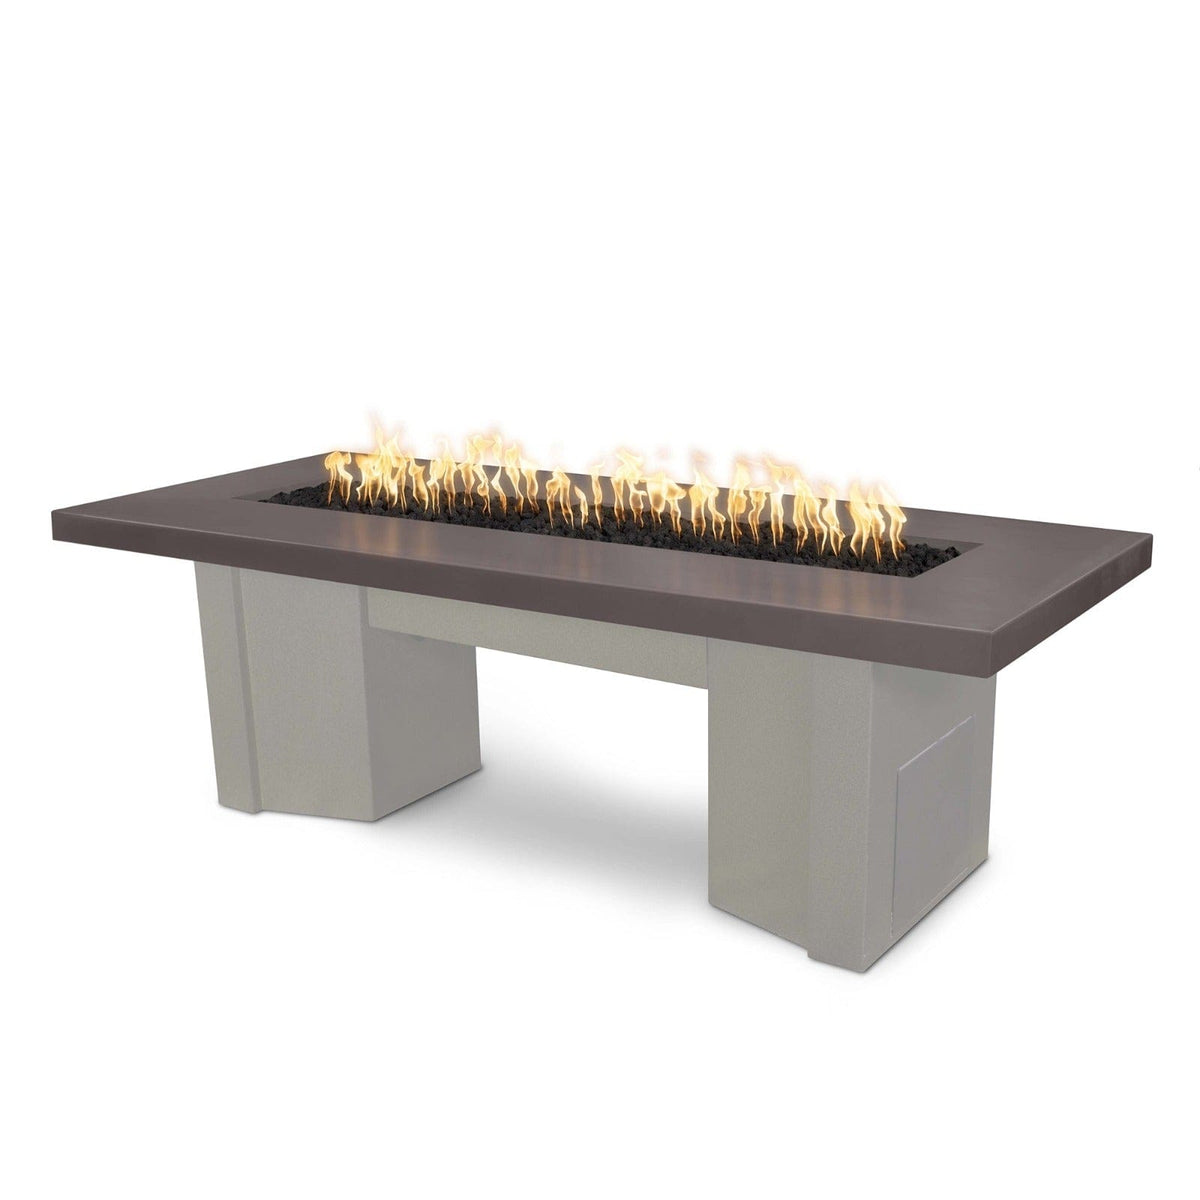 The Outdoor Plus Fire Features Chestnut (-CST) / Pewter Powder Coated Steel (-PEW) The Outdoor Plus 60&quot; Alameda Fire Table Smooth Concrete in Liquid Propane - Flame Sense System with Push Button Spark Igniter / OPT-ALMGFRC60FSEN-LP